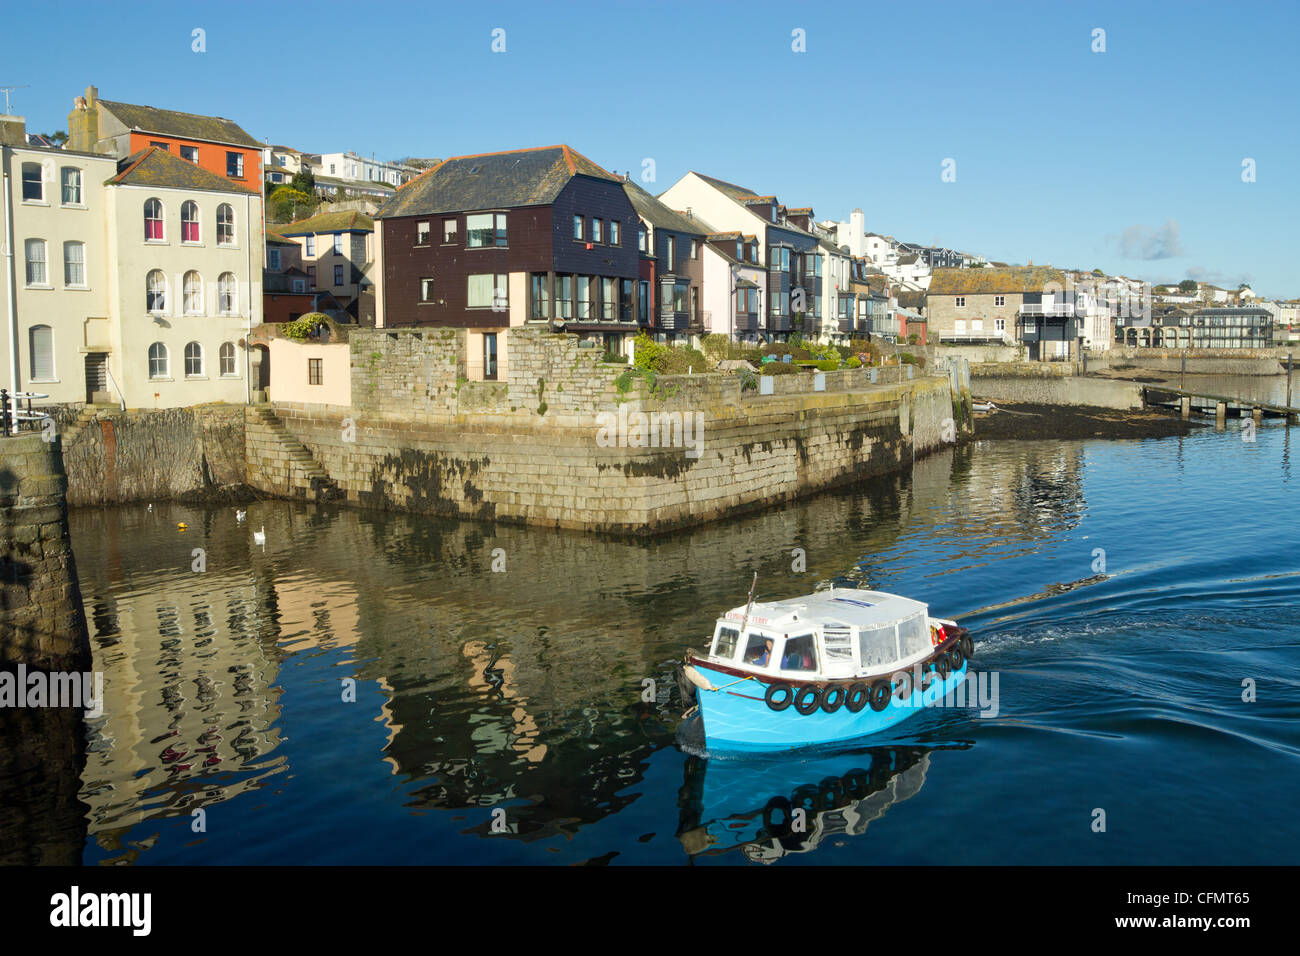 The Flushing ferry approaching Prince of Wales pier in Falmouth, Cornwall UK. Stock Photo